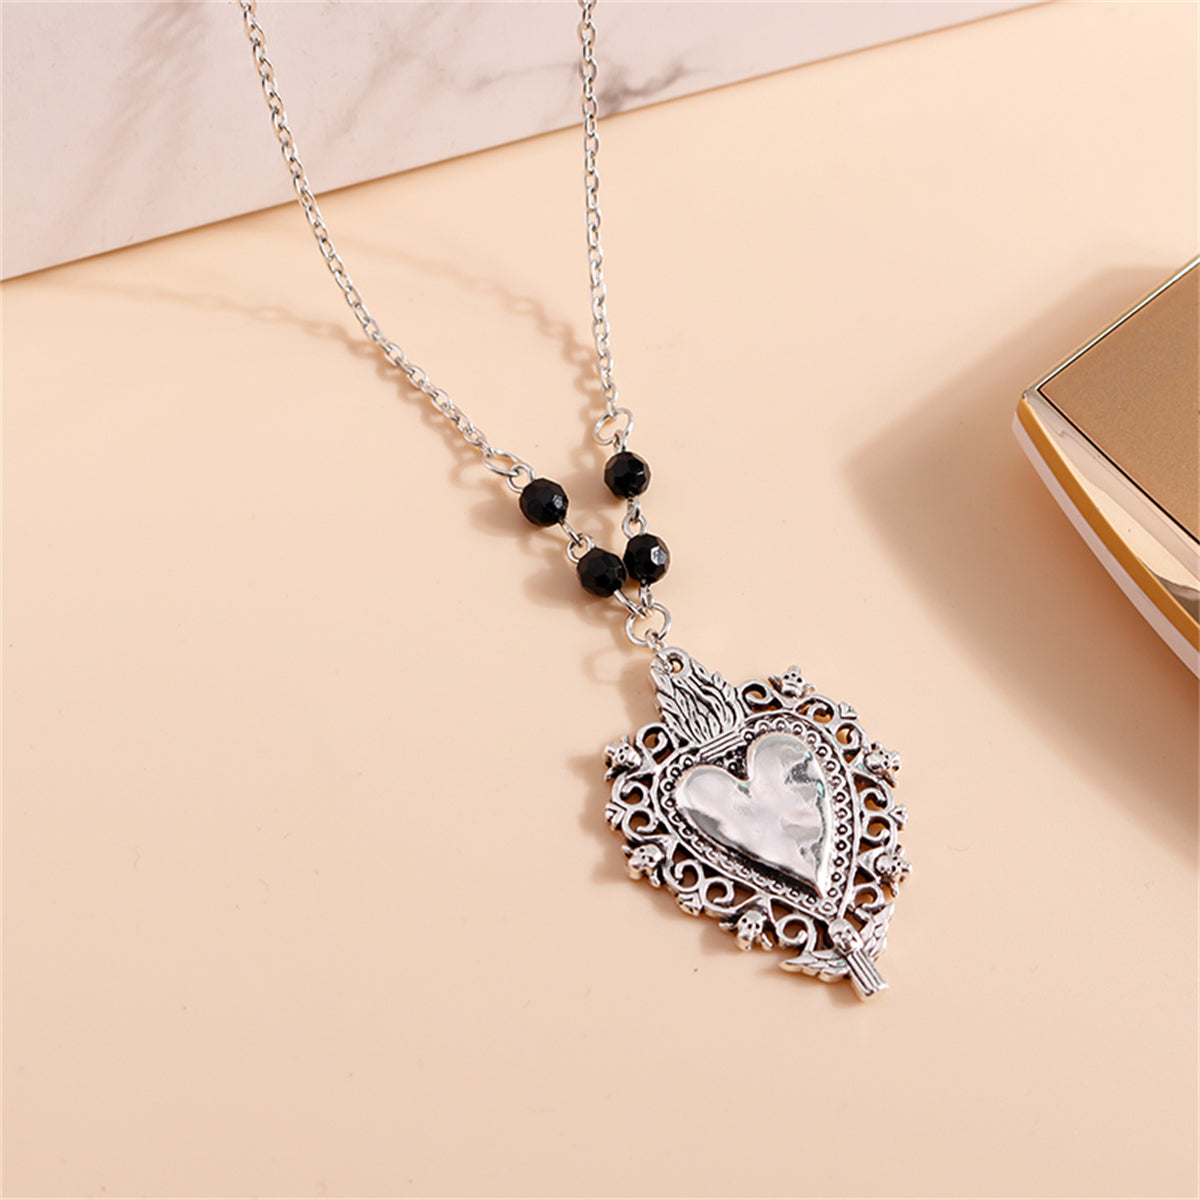 Black Acrylic & Silver-Plated Floral Heart Pendant Necklace